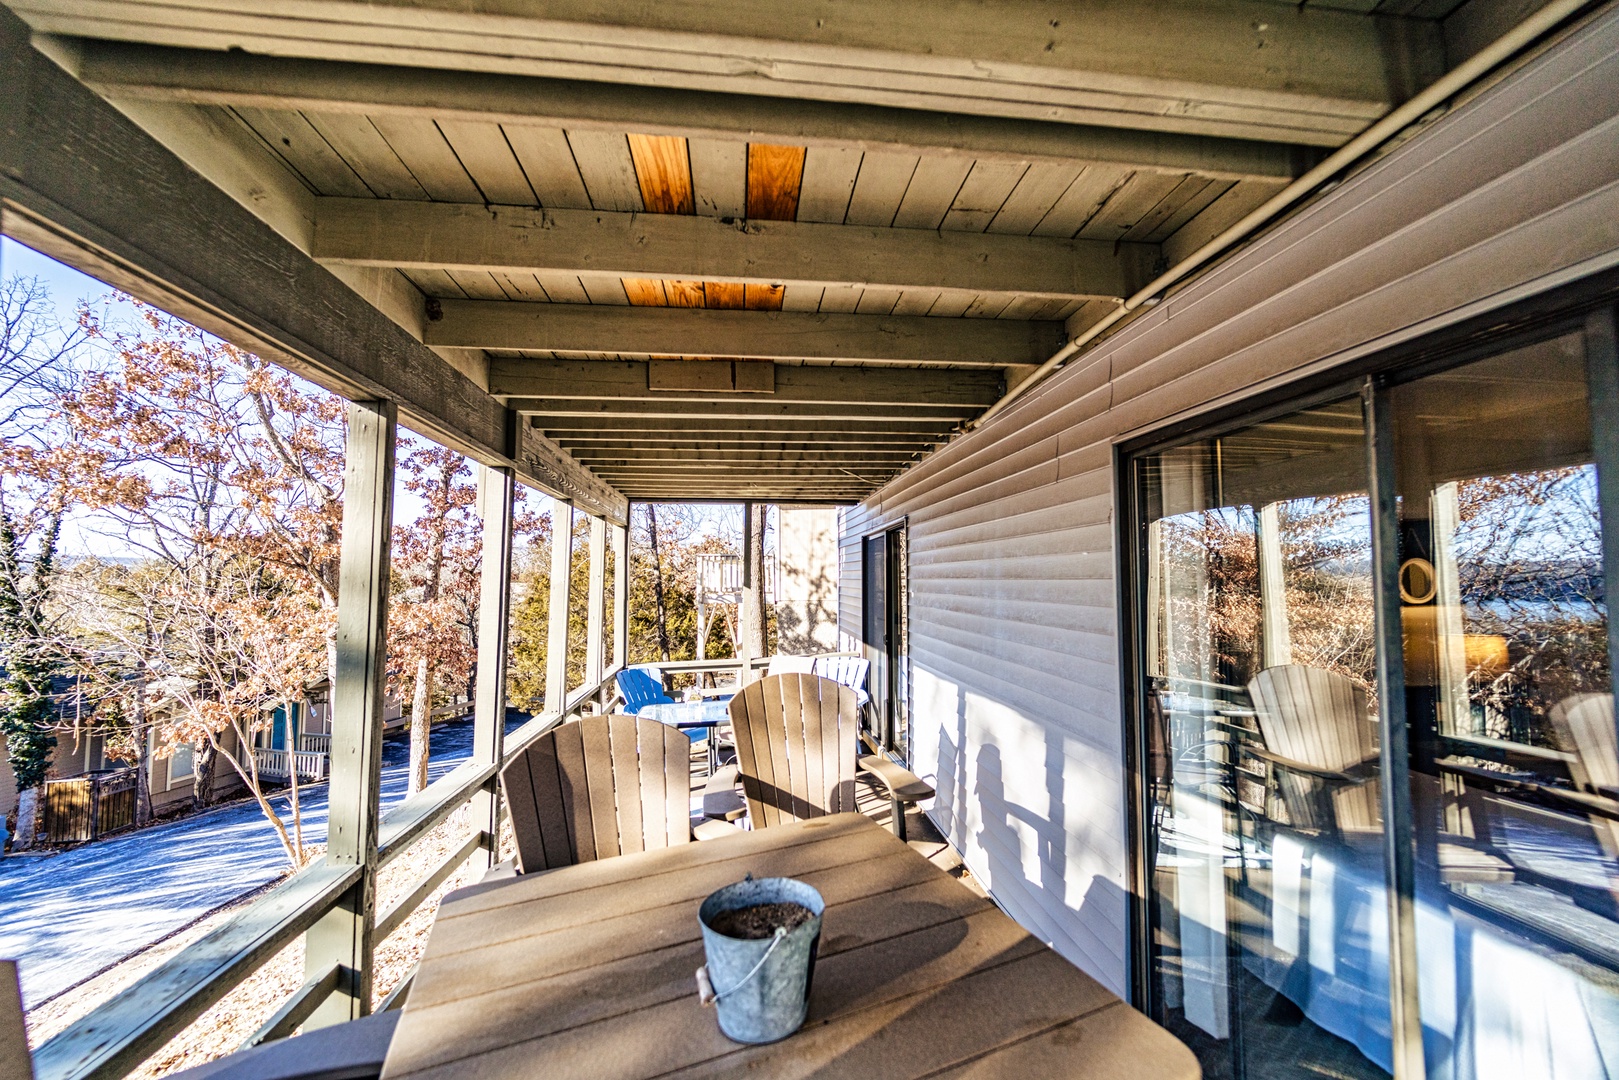 Take in the fresh air & sunshine on the shared back deck